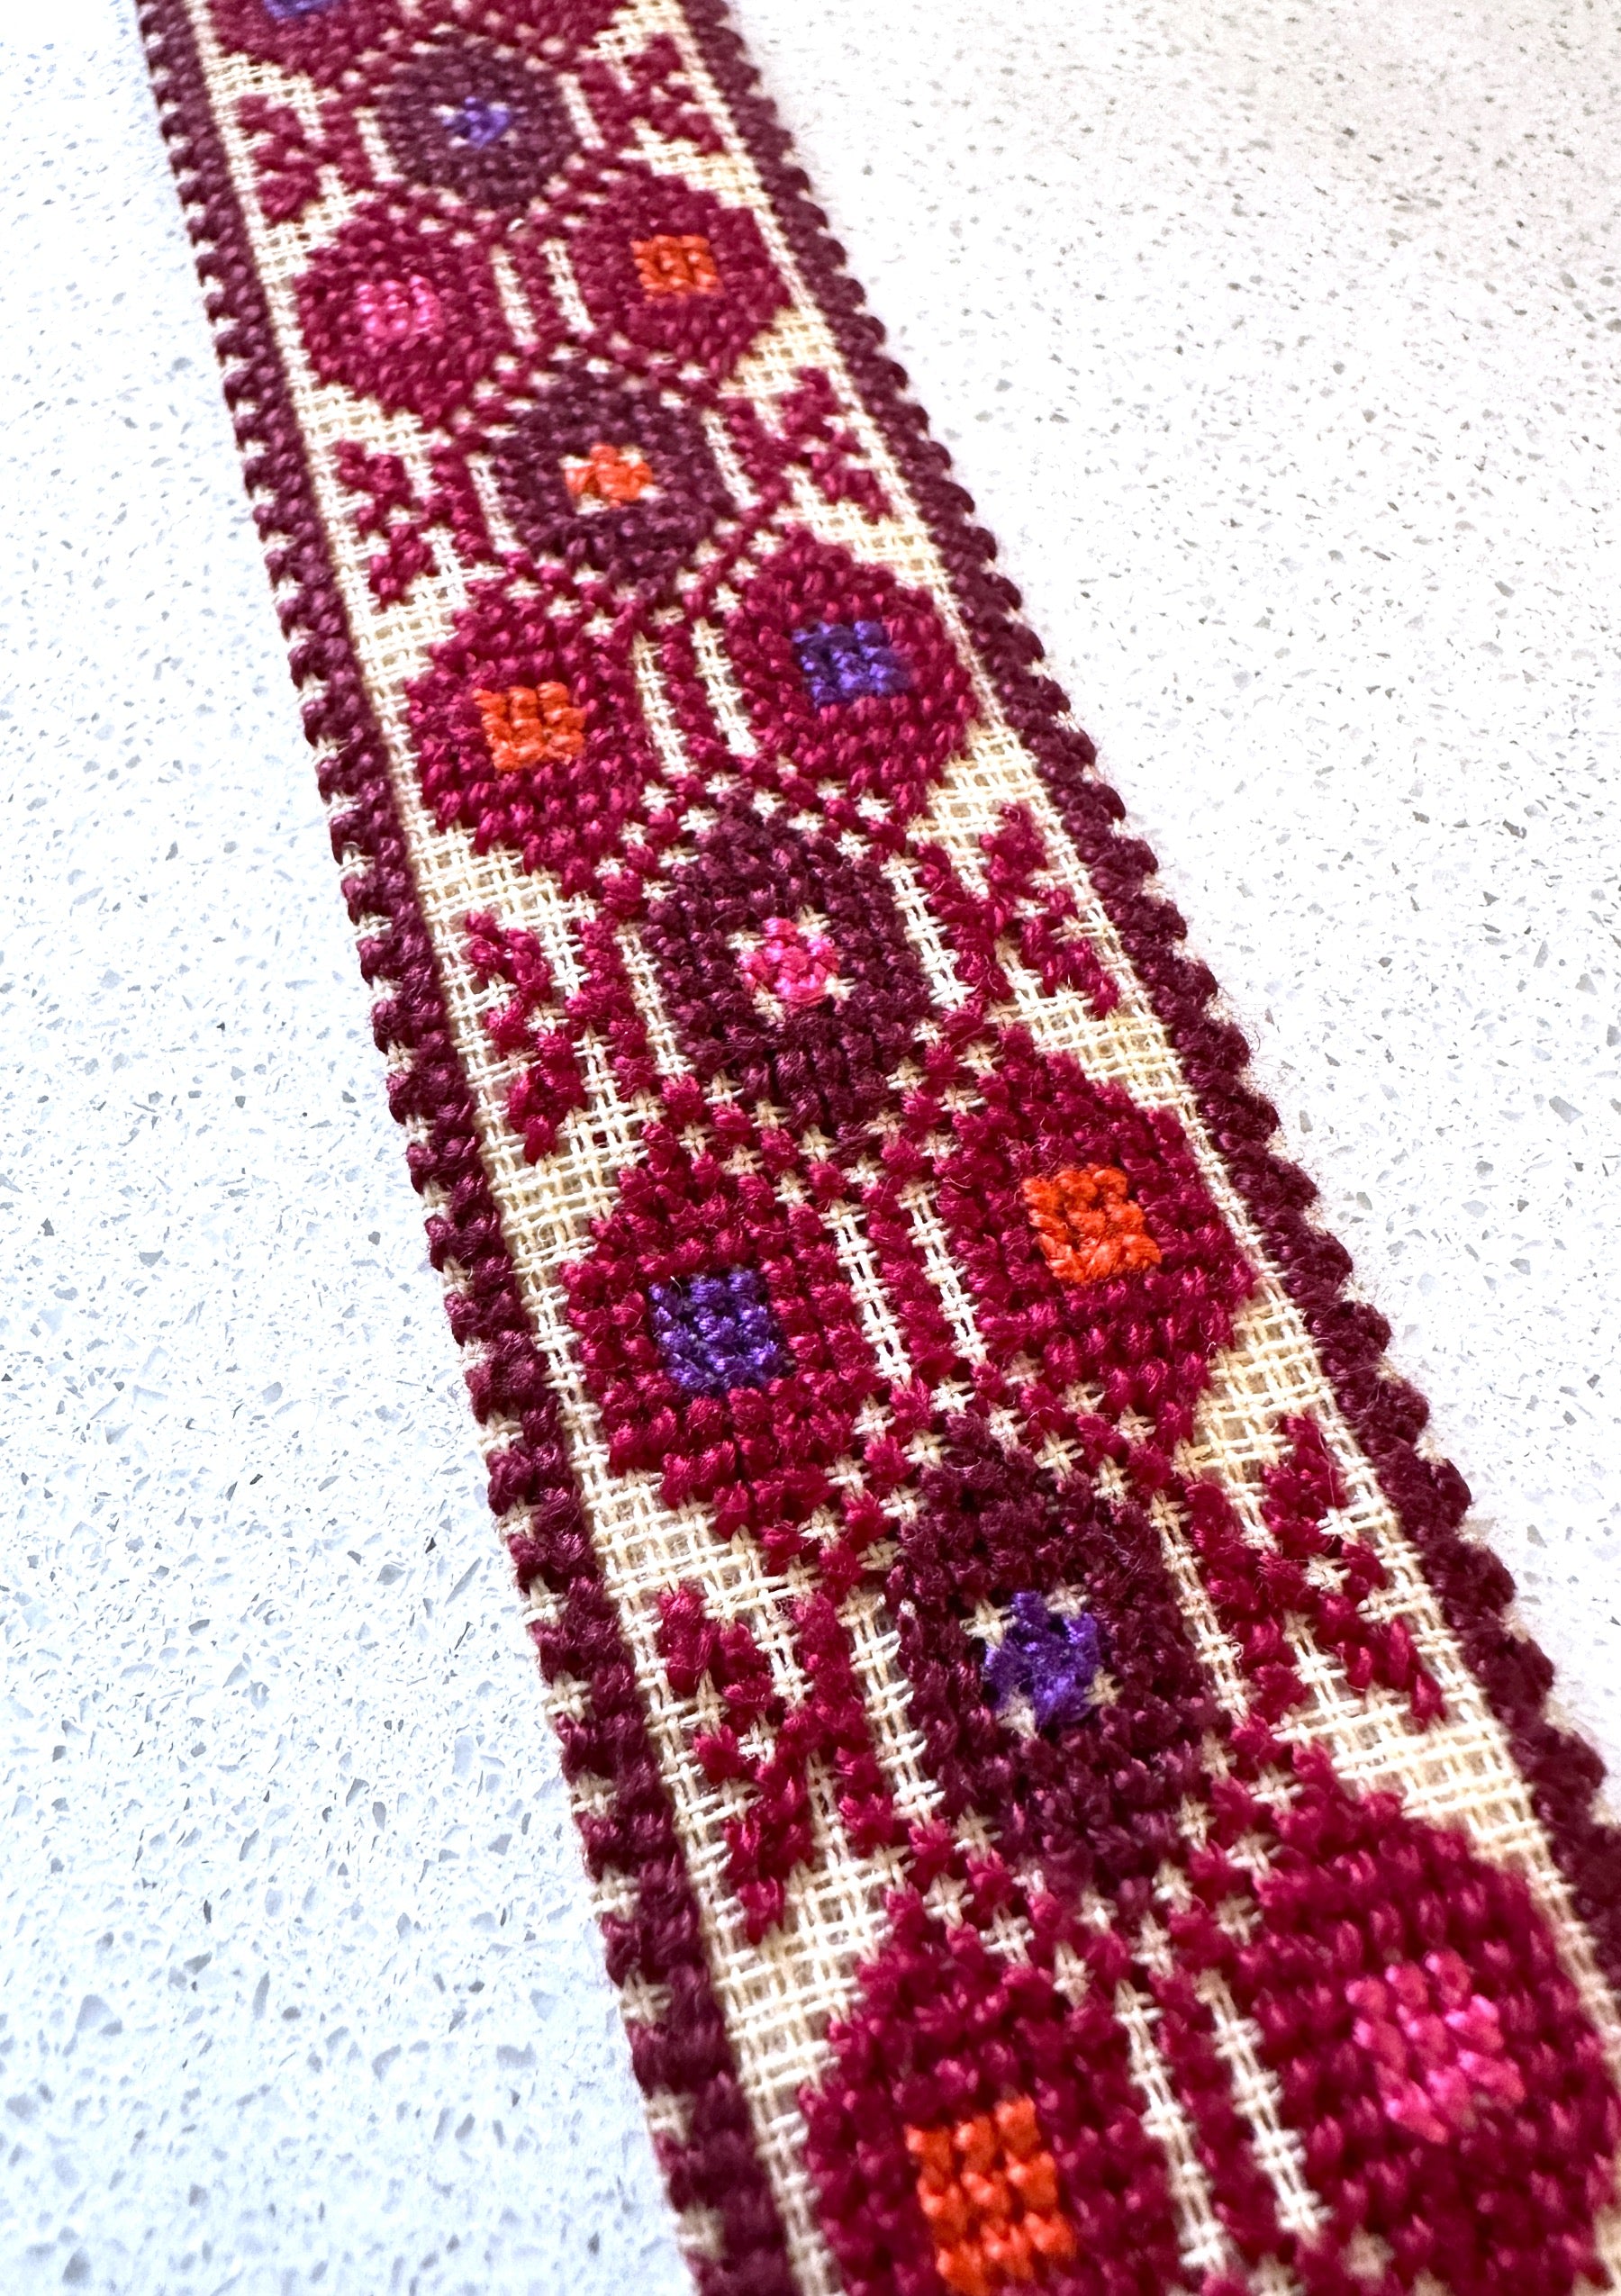 Palestinian Hand Embroidered Bookmark - Farraneh